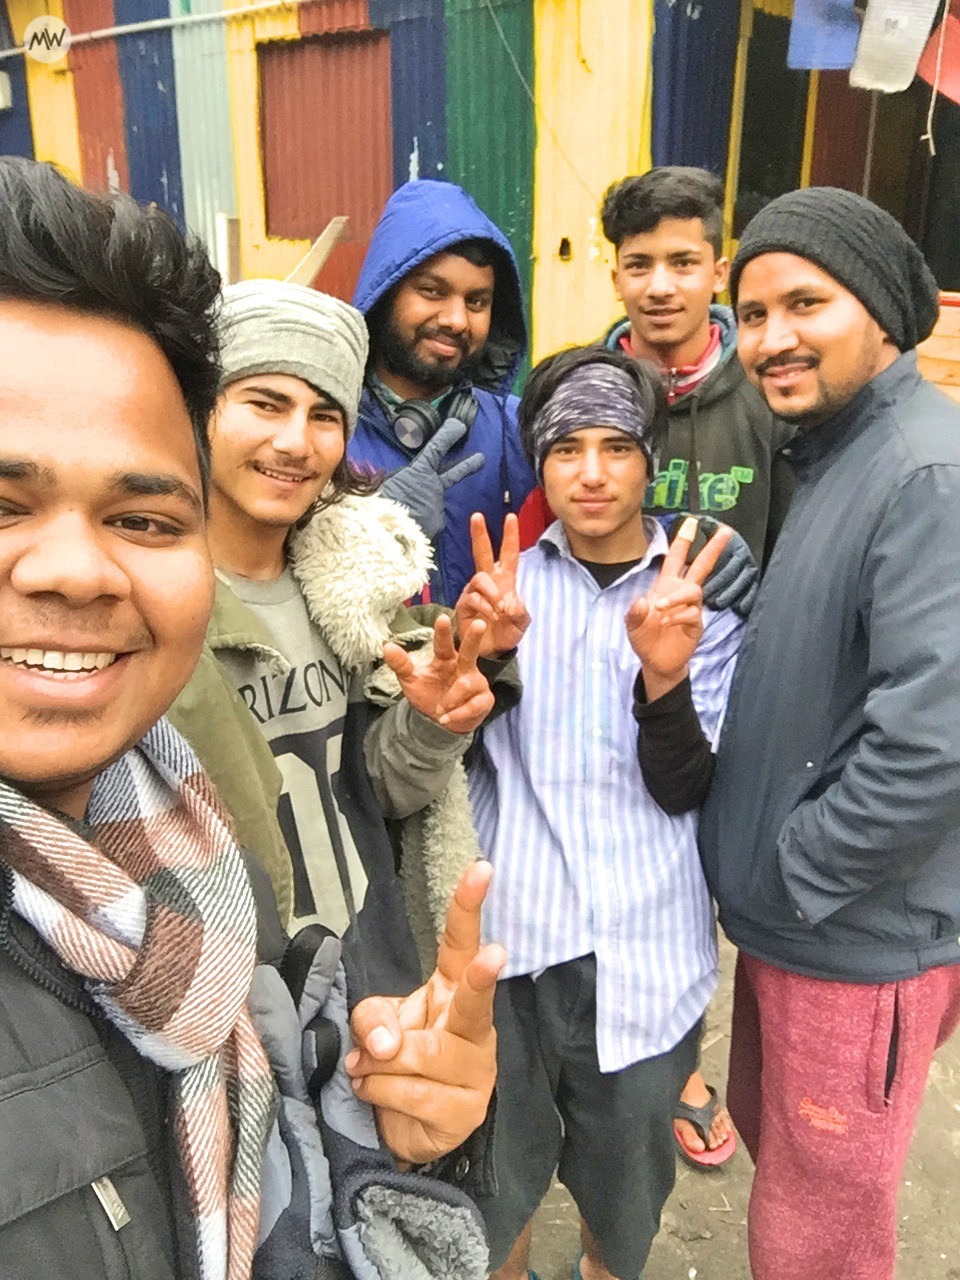 Couchsurfing India: First Experience Of Staying Free (+Tips)